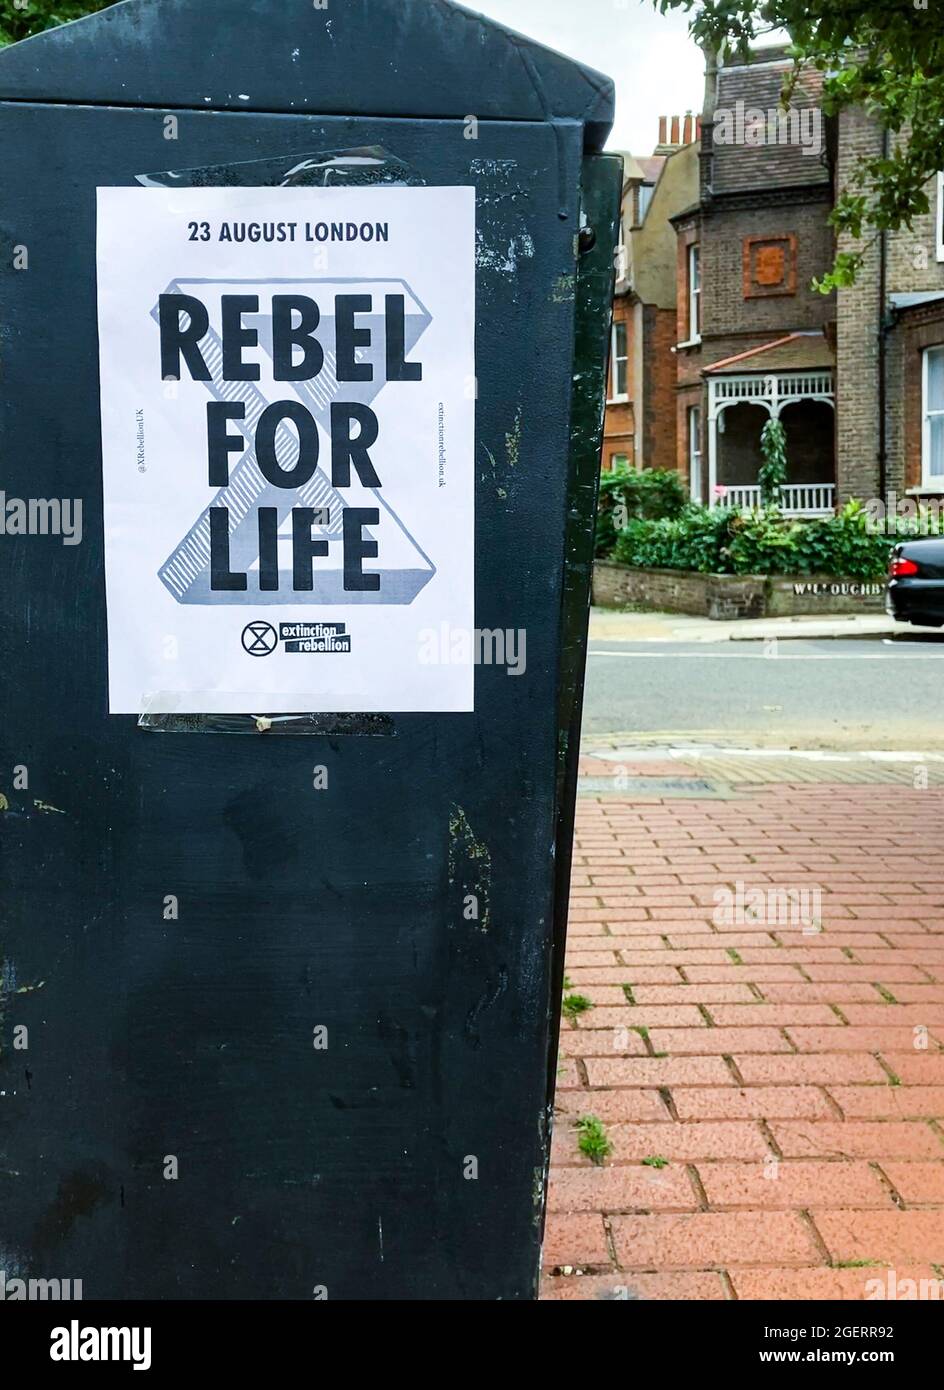 Extinction Rebellion Rebel for Life poster advertising a climate change protest in London on 23rd August 2021. Stock Photo